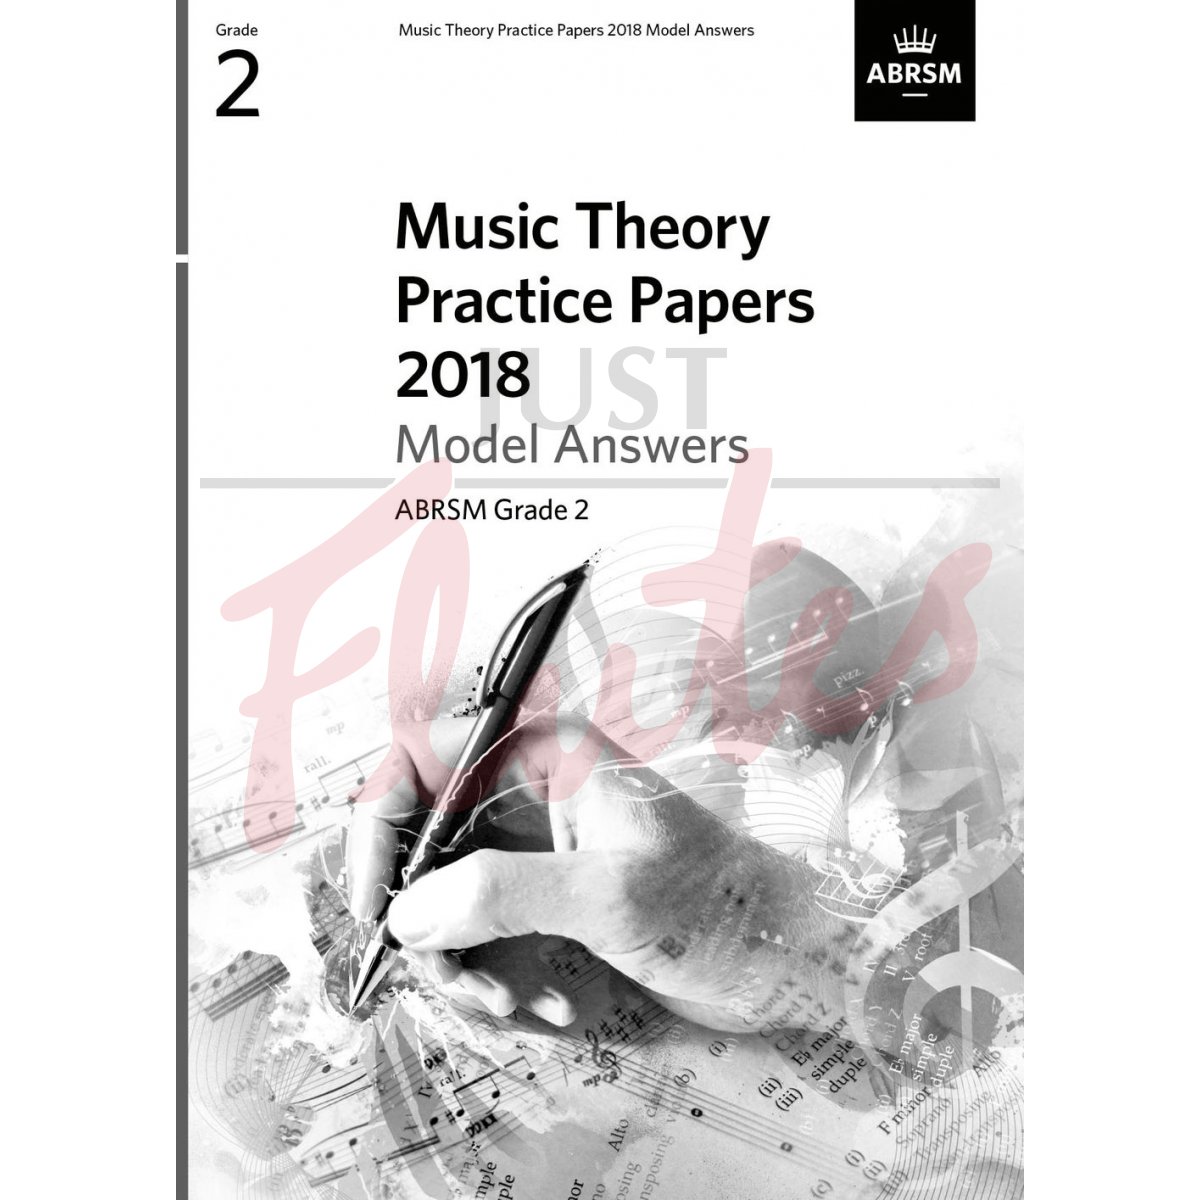 Music Theory Practice Papers 2018 Grade 2 - Model Answers